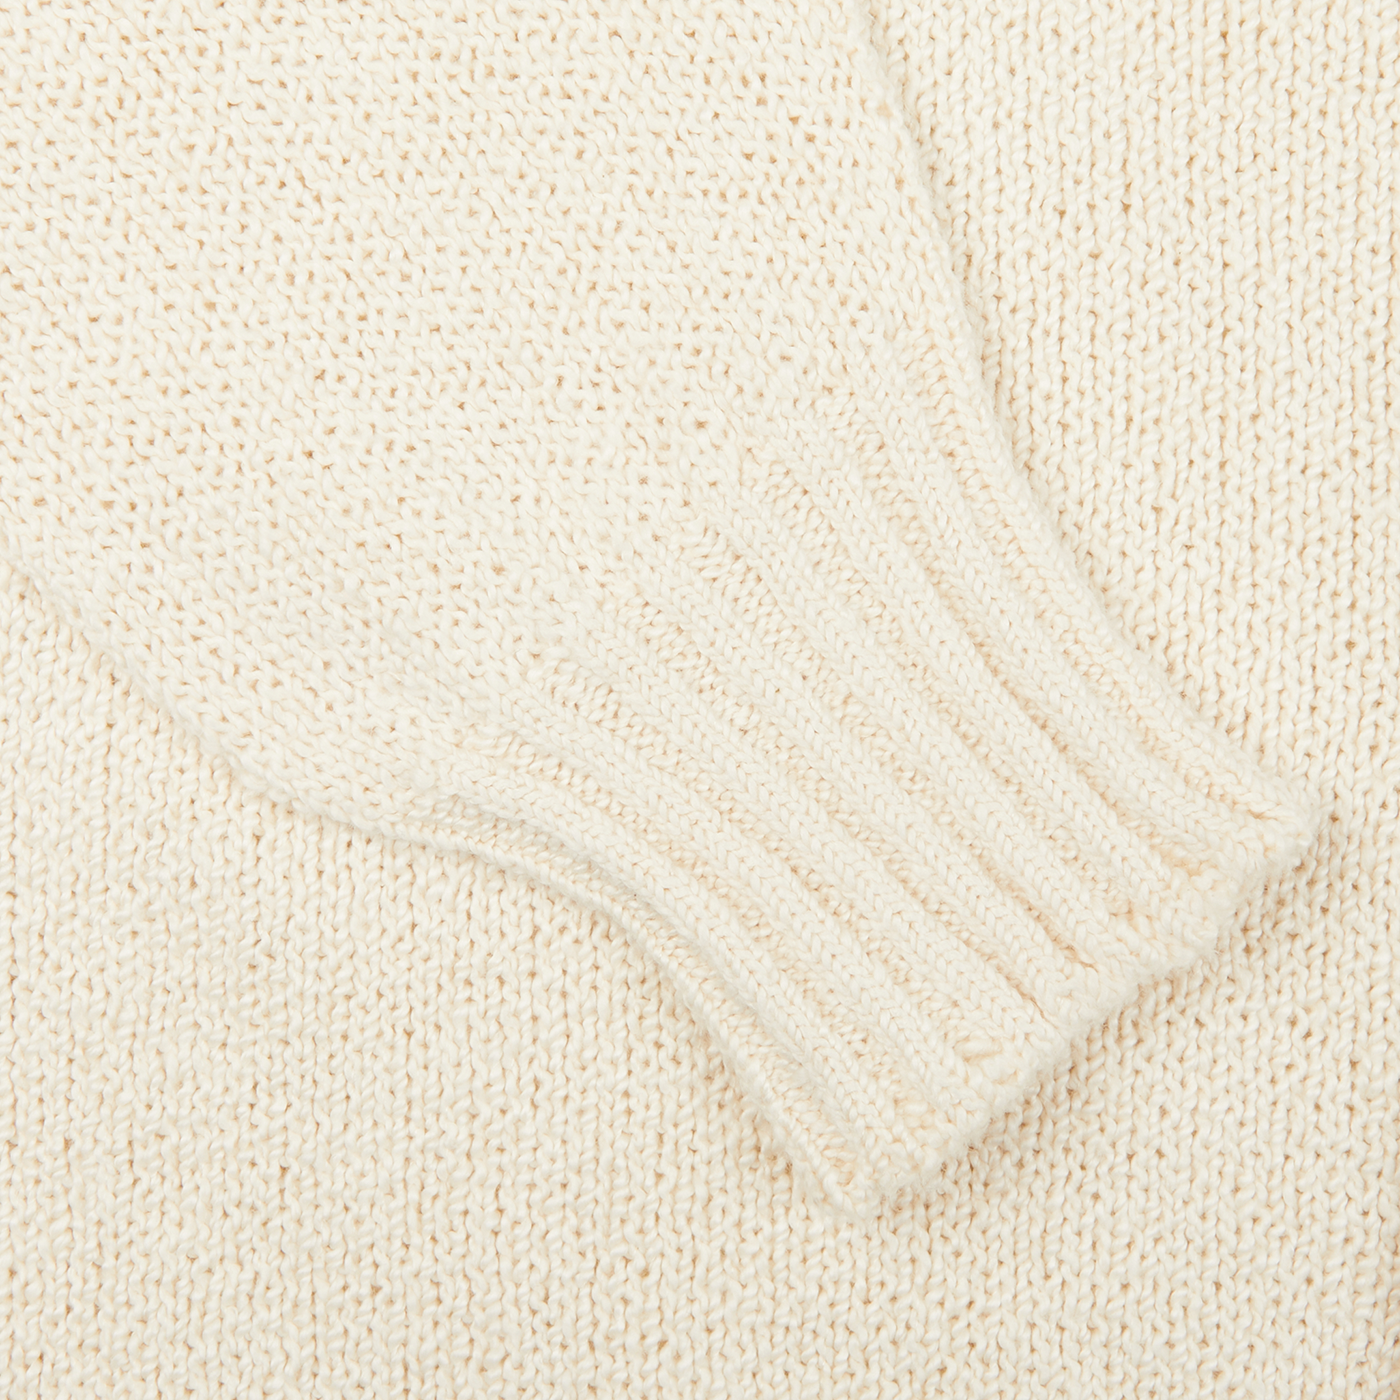 A close up of a luxurious Drumohr Ecru White Knitted Cotton Cardigan.